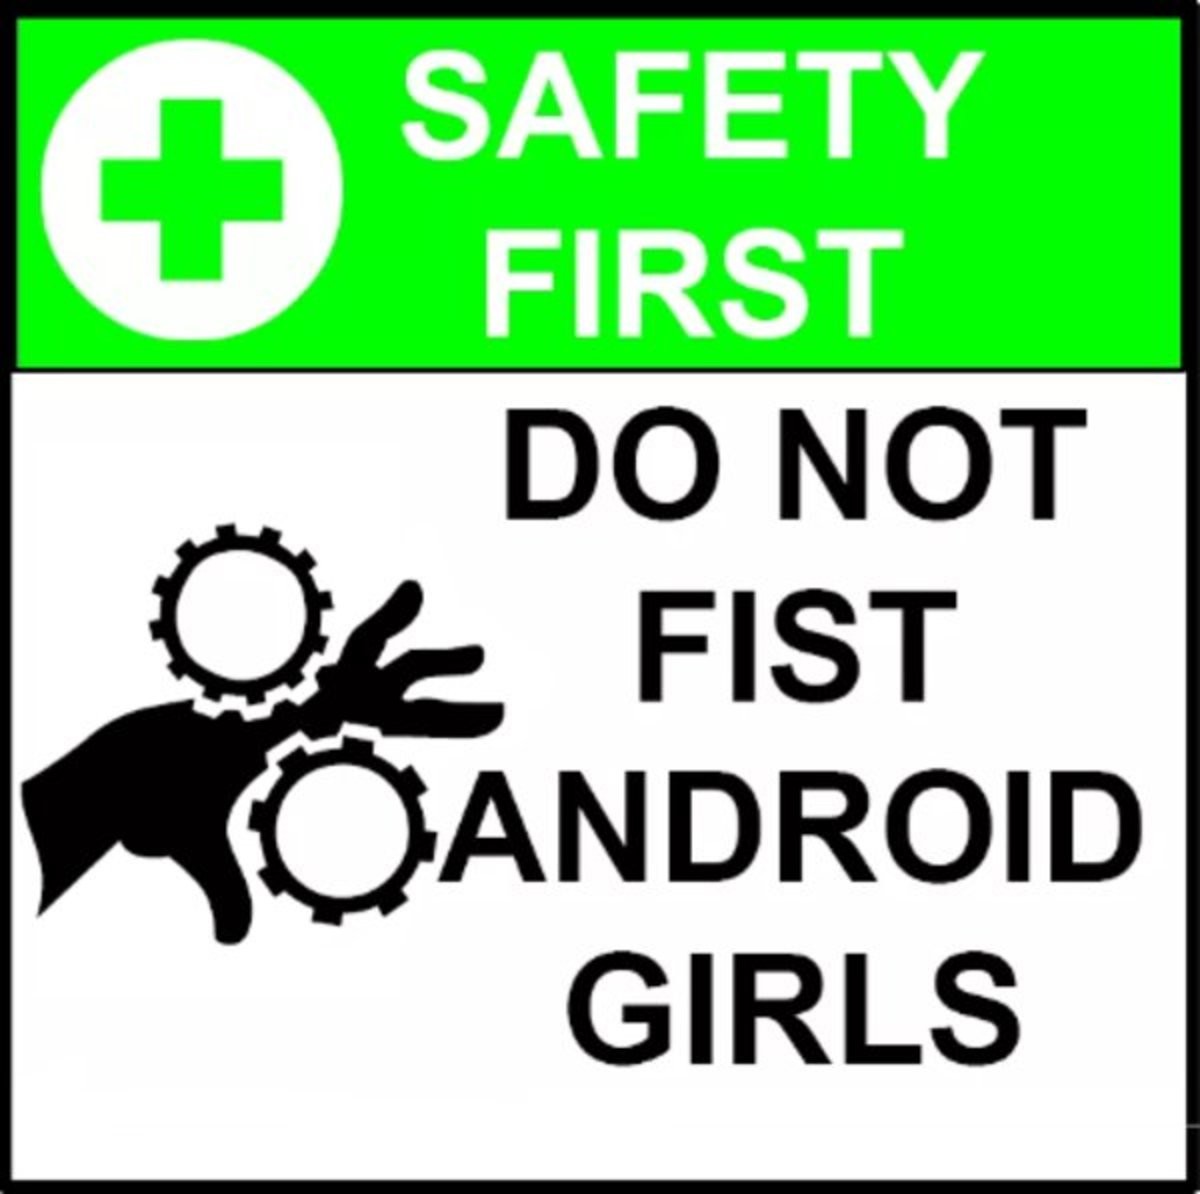 Do not click this. Dont first Android. Do not finger Android girls. Do not first Android girls. Do not first Android girls фото.